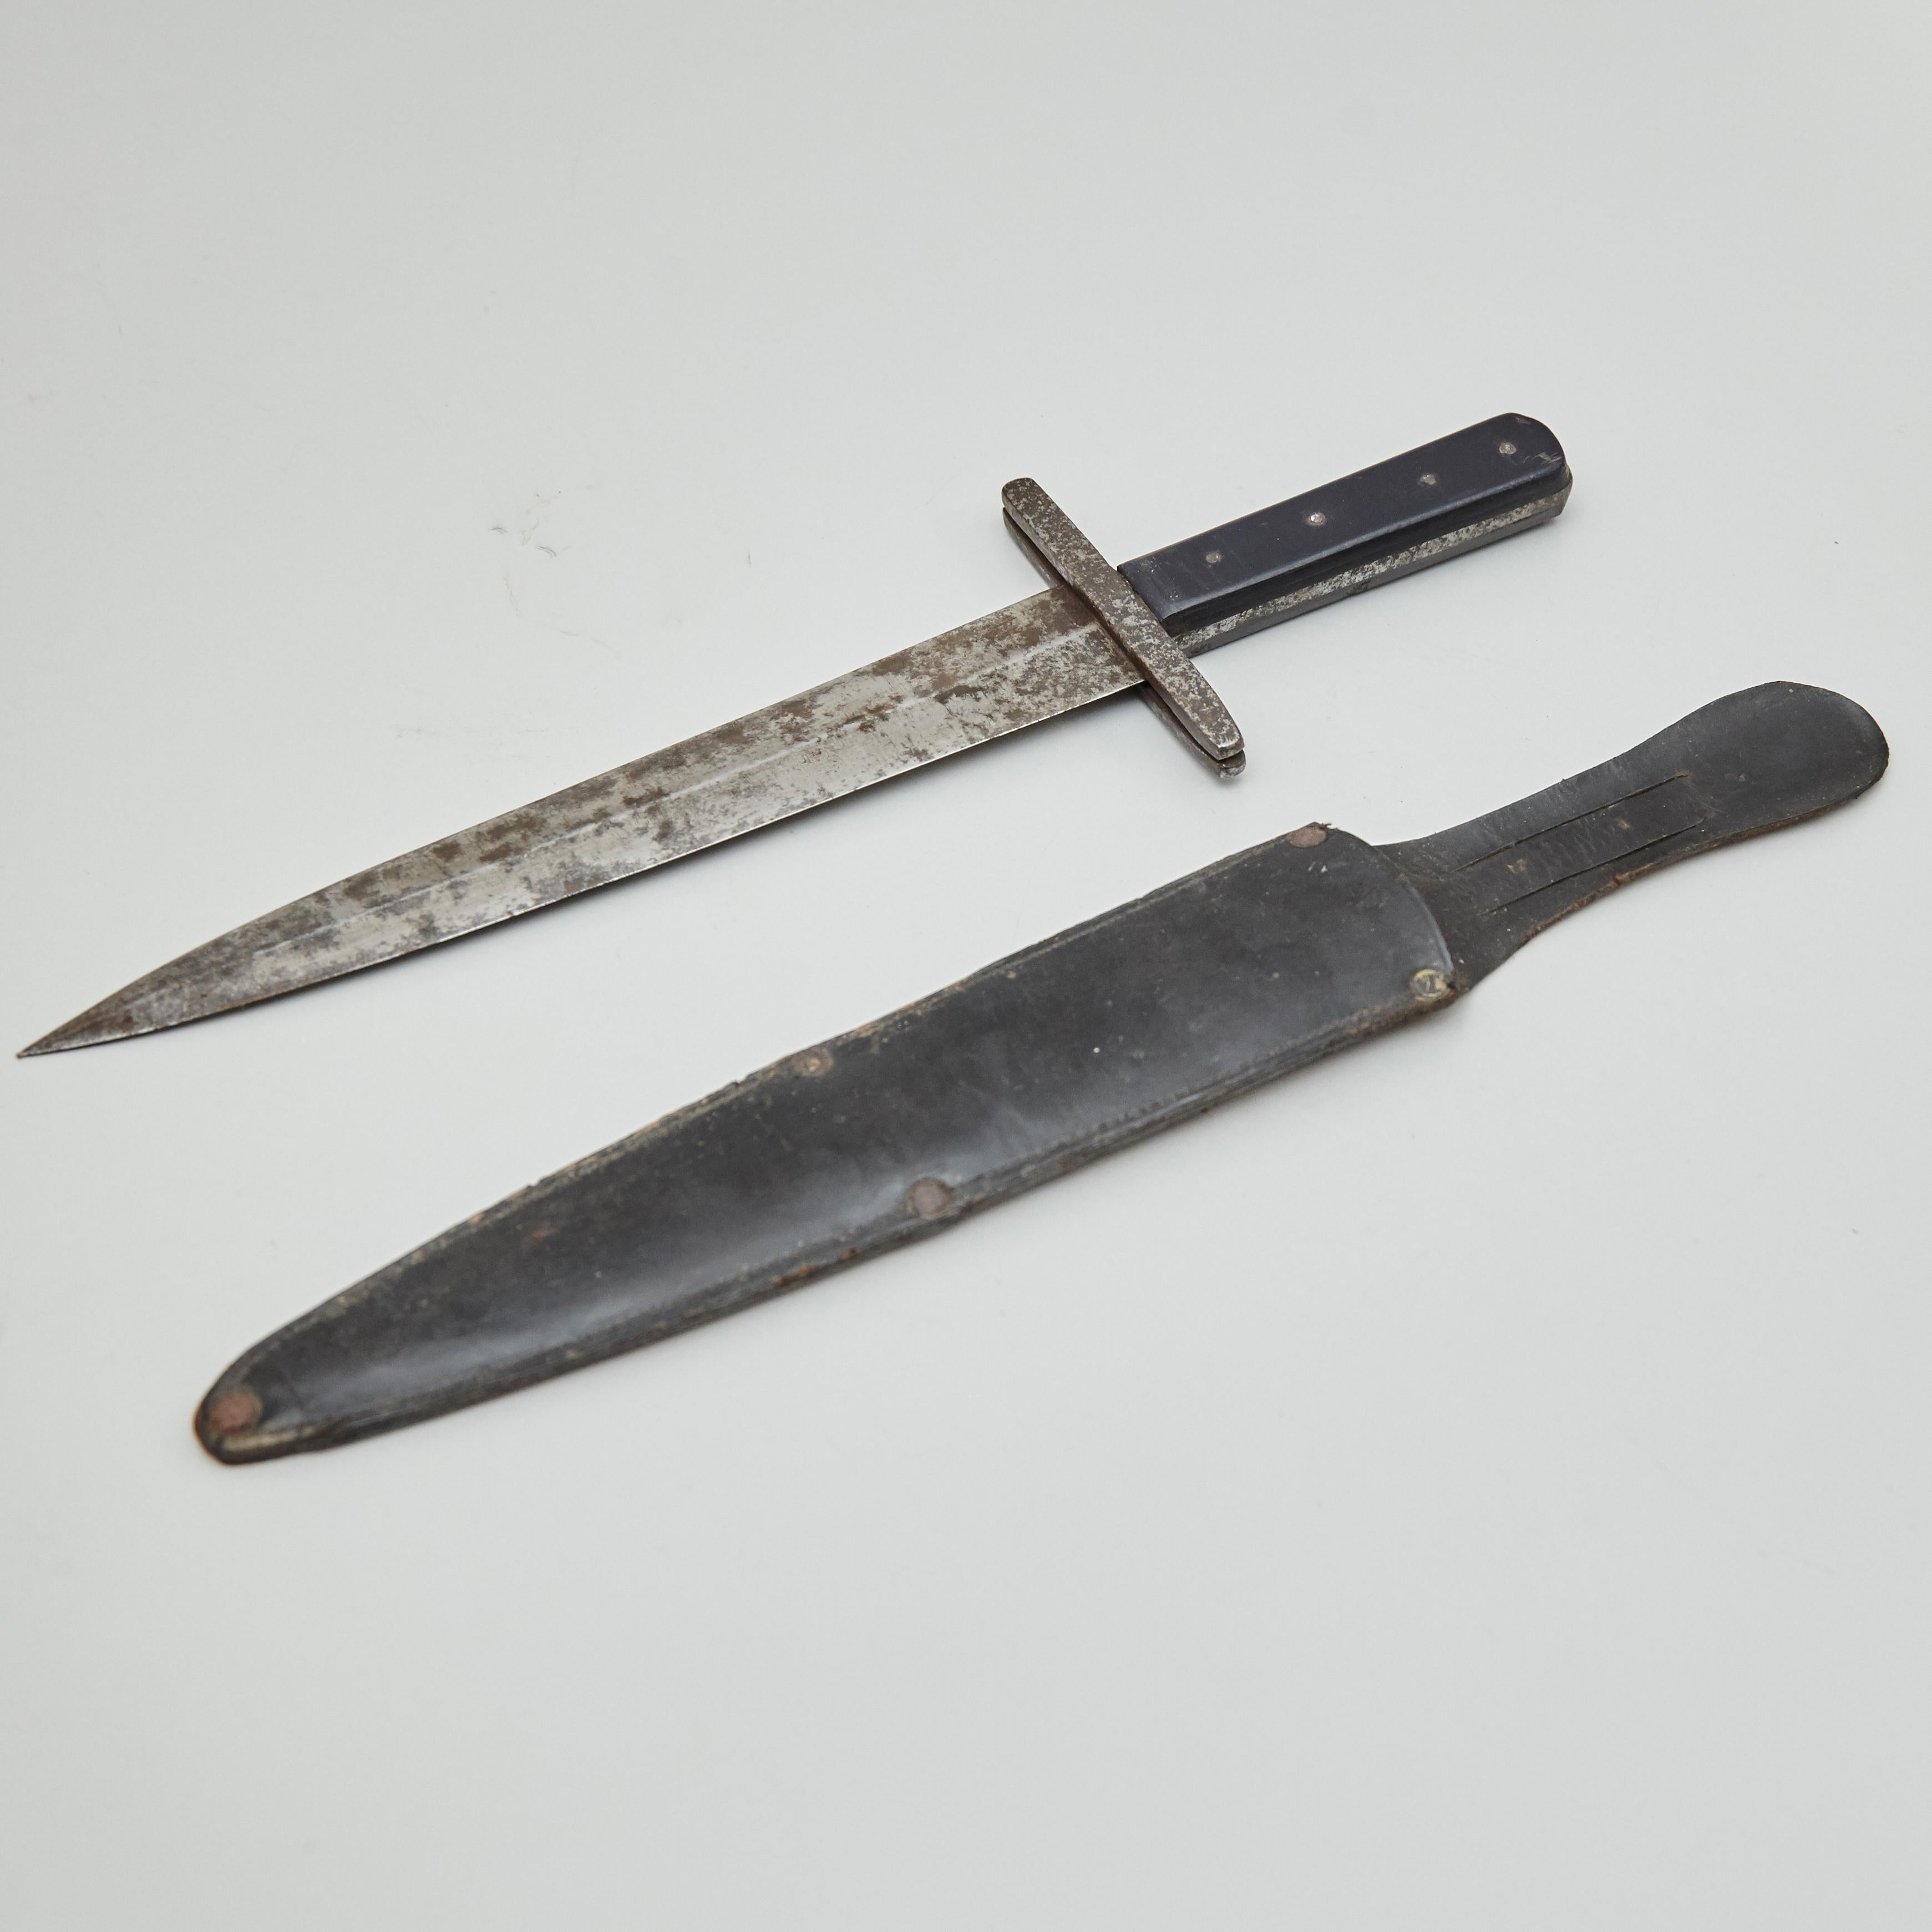 Early 20th century antique hunter knife with leather case.
By unknown artisan from Spain.

In original condition, with minor wear consistent with age and use, preserving a beautiful patina. 

Materials:
Metal
Leather

Dimensions:
D 2 cm x